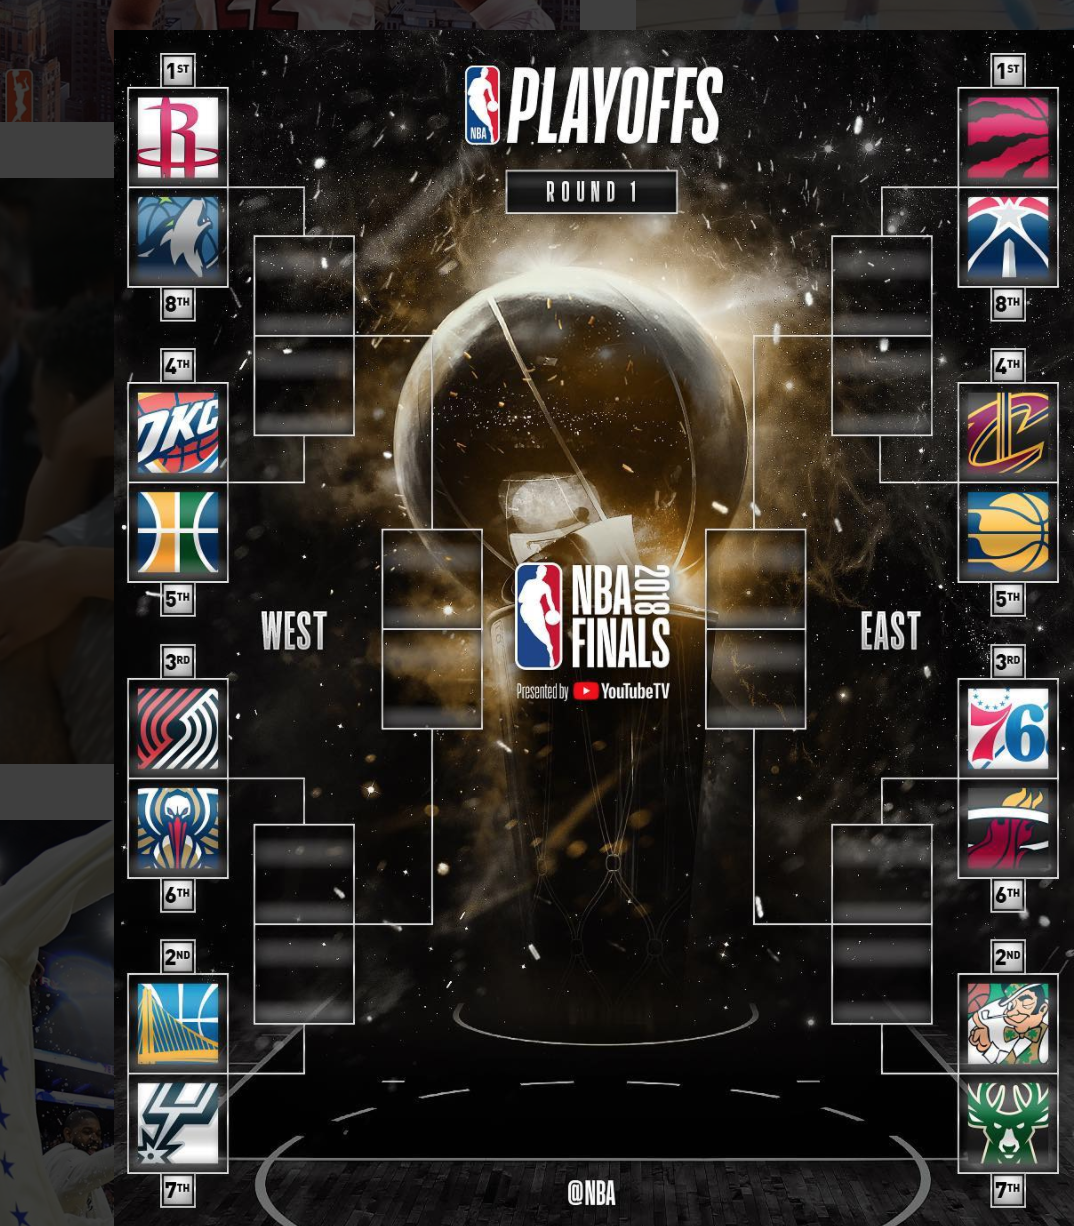 2018 NBA Playoffs Preview Round 1 - Page 2 of 2 - Jocks 